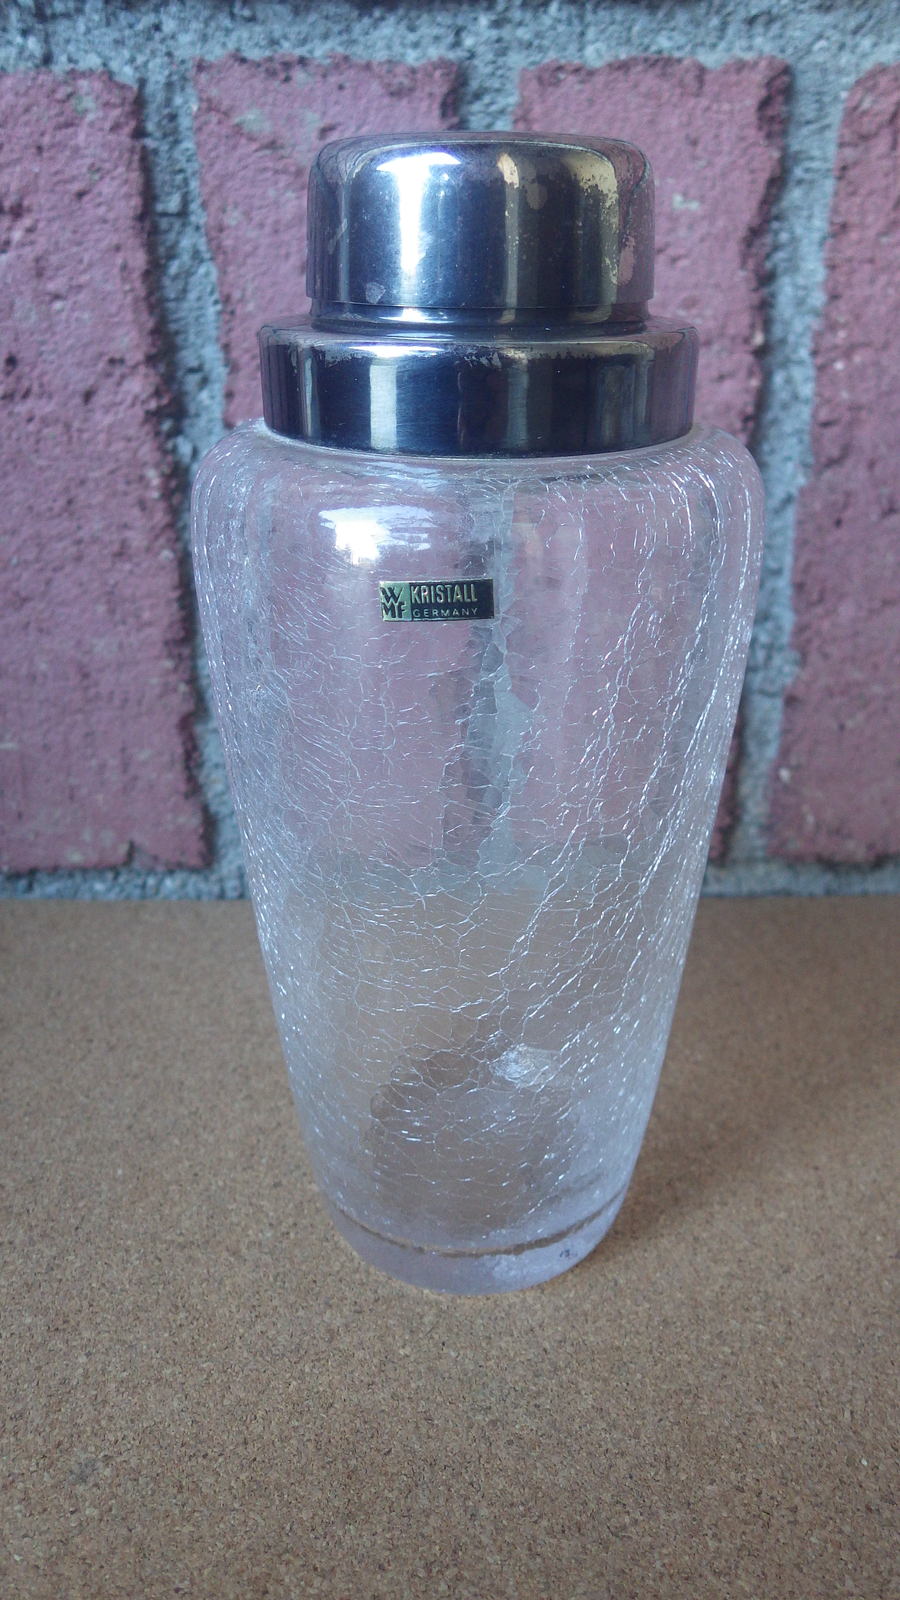 Primary image for WMF KRISTALL GERMANY SILVER PLATE CRACKLE GLASS ART DECO COCKTAIL SHAKER PRE WW2